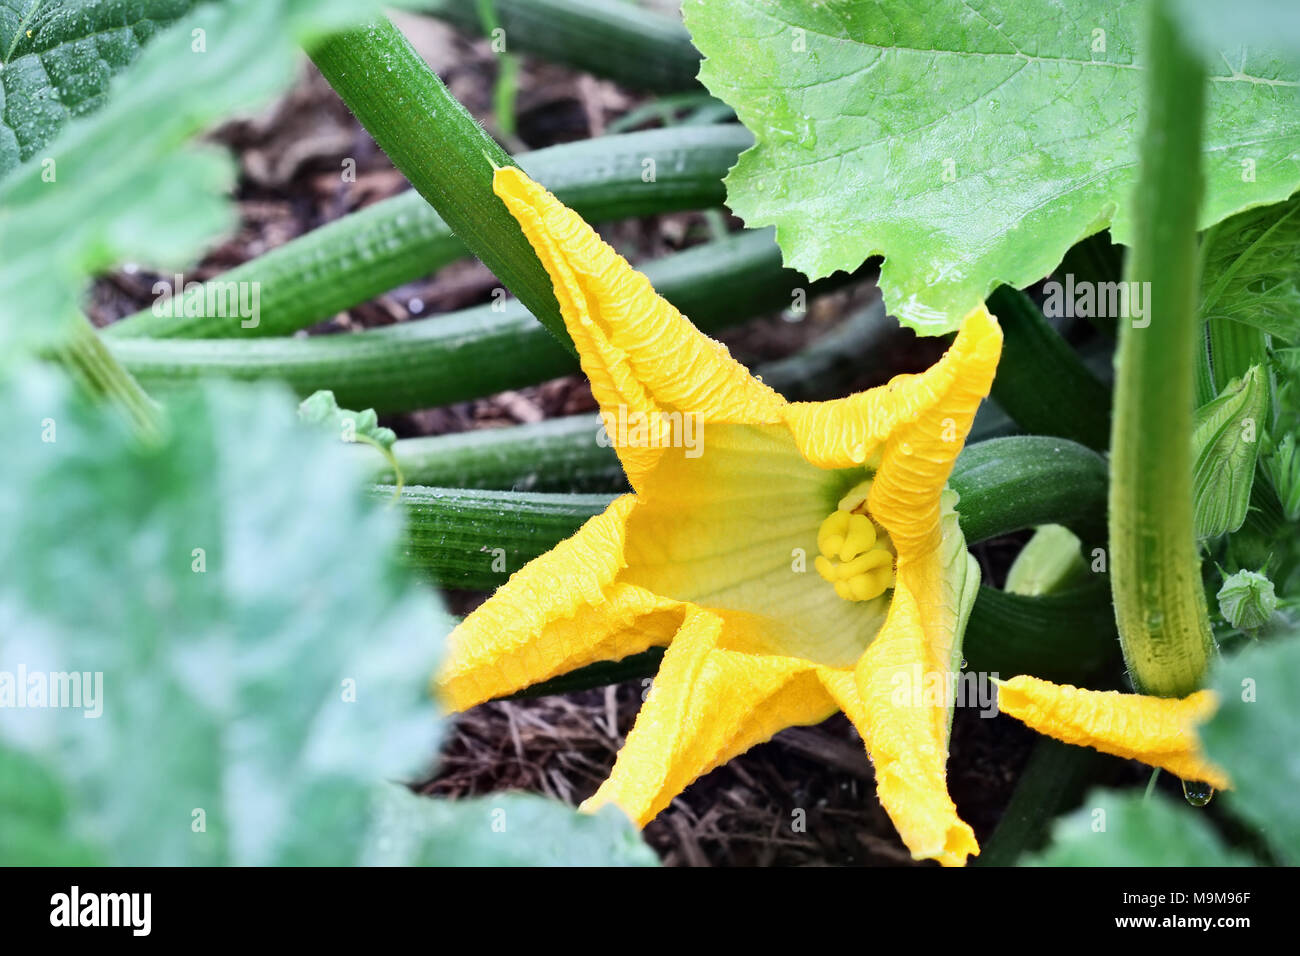 Blossom of an organically grown zucchini plant growing in a mulched bed. Extreme shallow depth of field with selective focus. Stock Photo